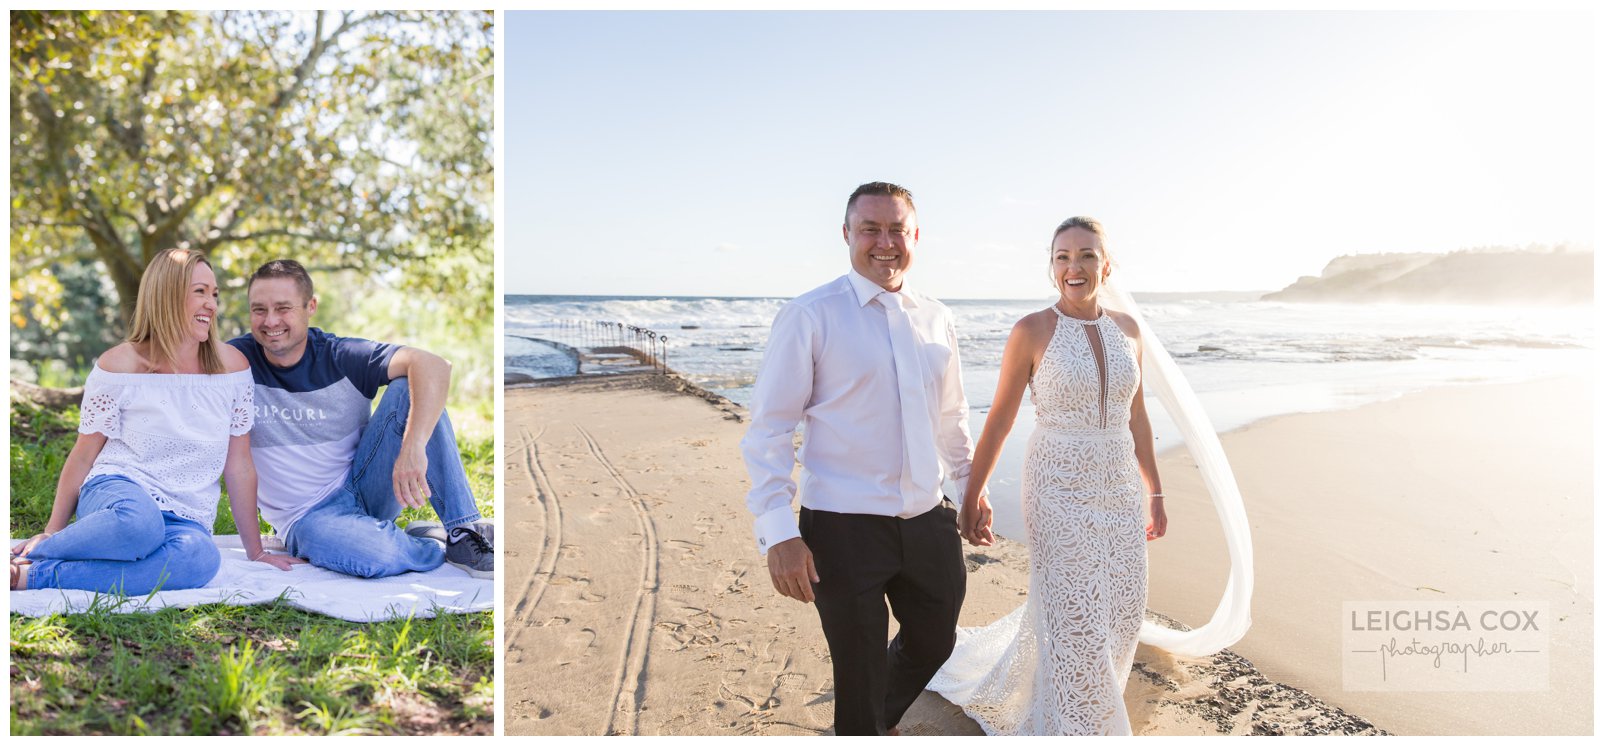 Maitland Photographer for life, wedding and family